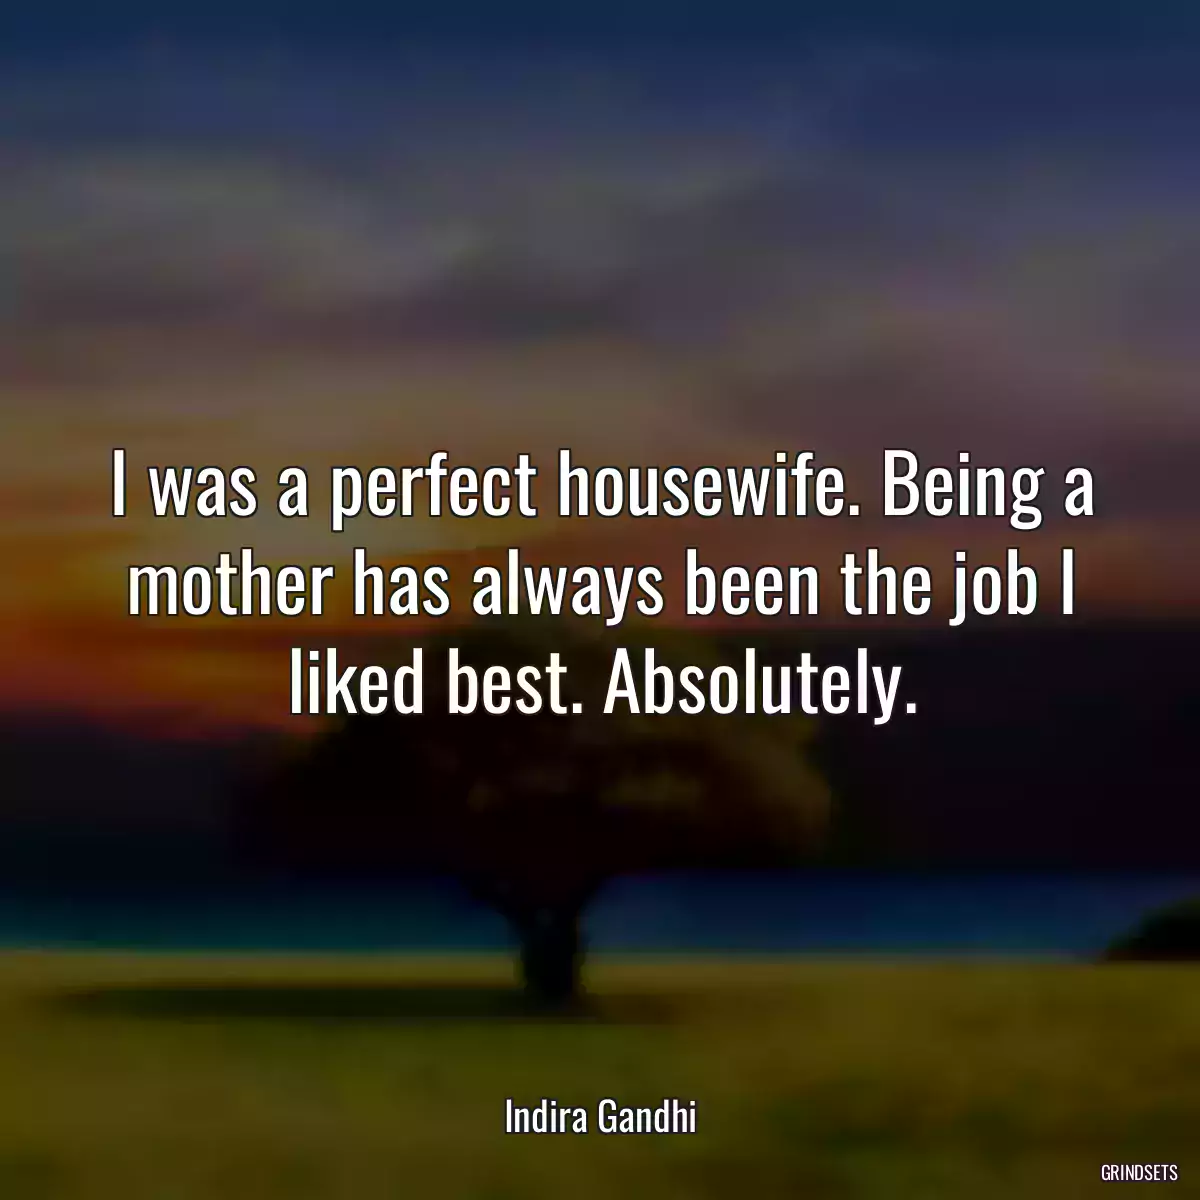 I was a perfect housewife. Being a mother has always been the job I liked best. Absolutely.